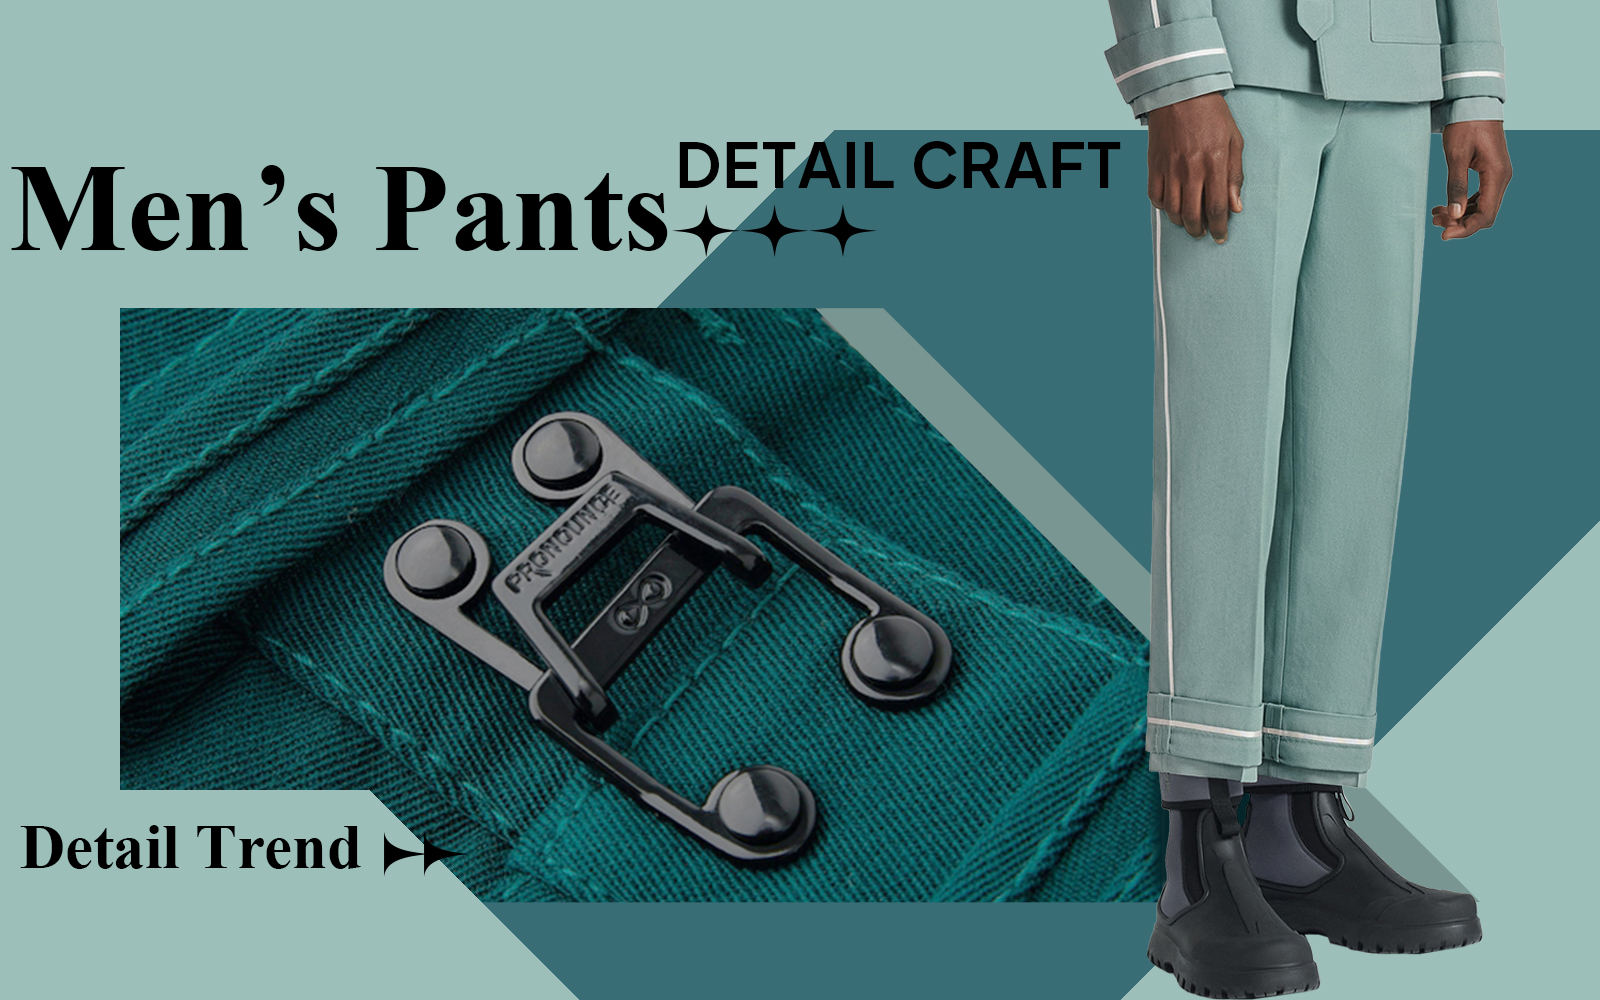 Localized Structure -- The Detail & Craft Trend for Men's Pants